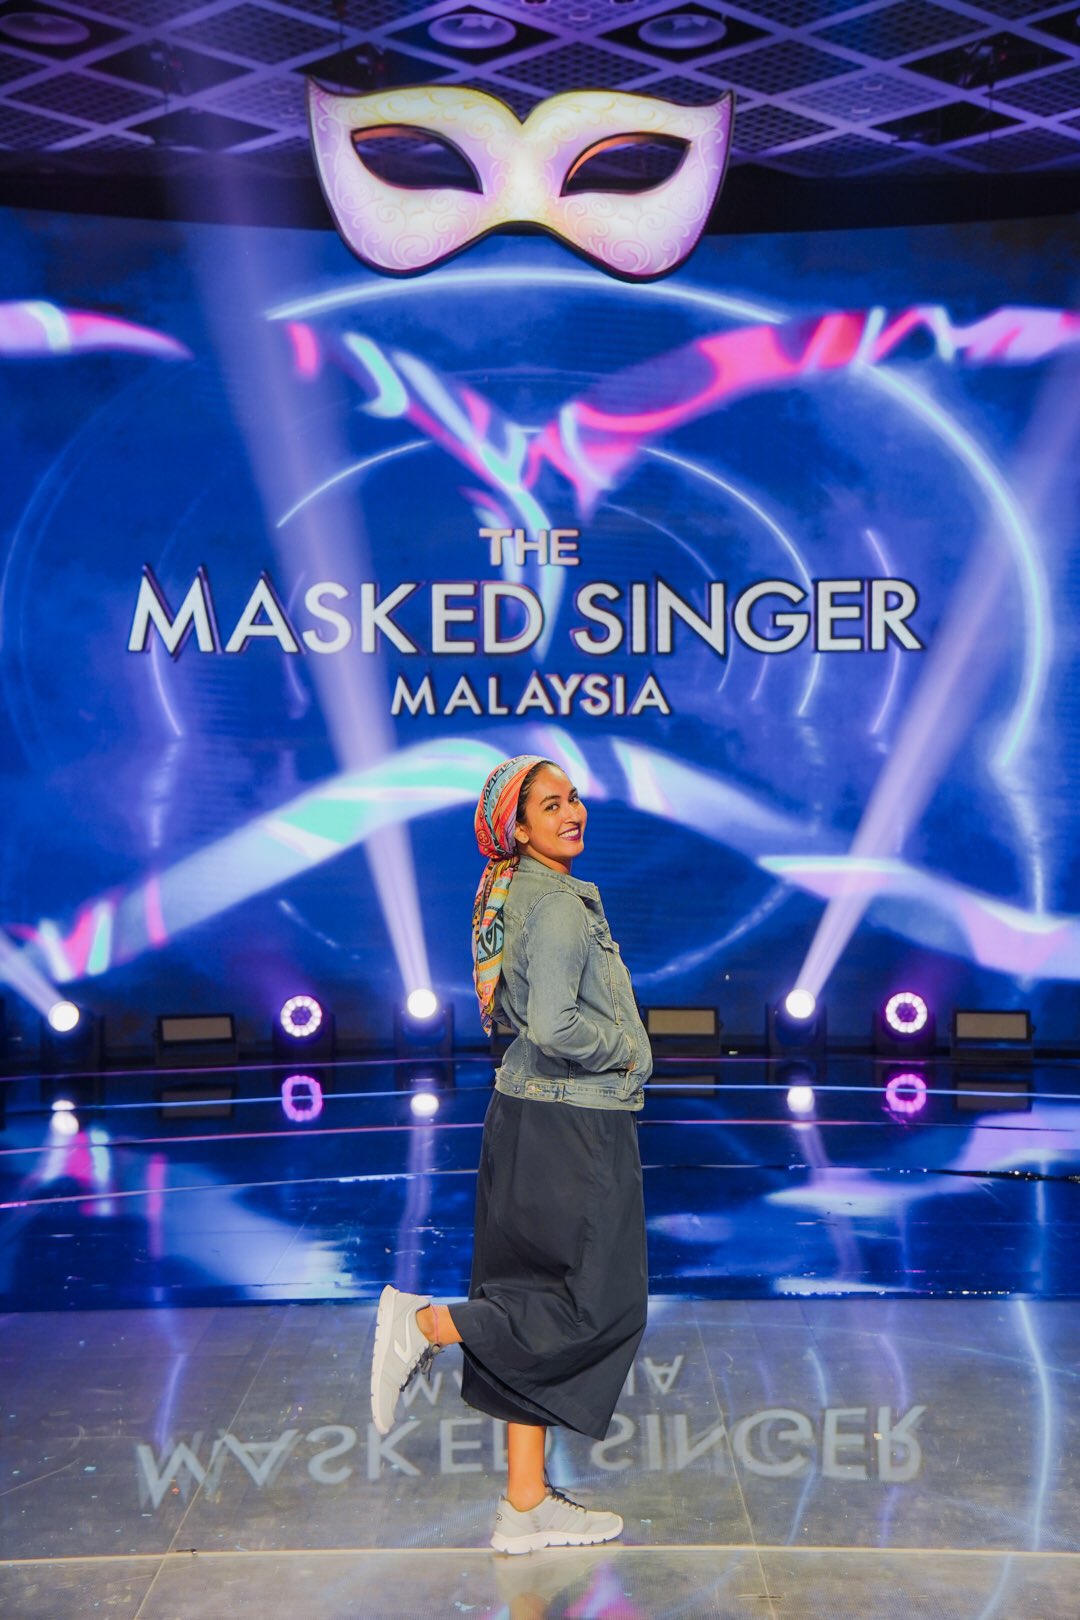 The masked singer malaysia reunion